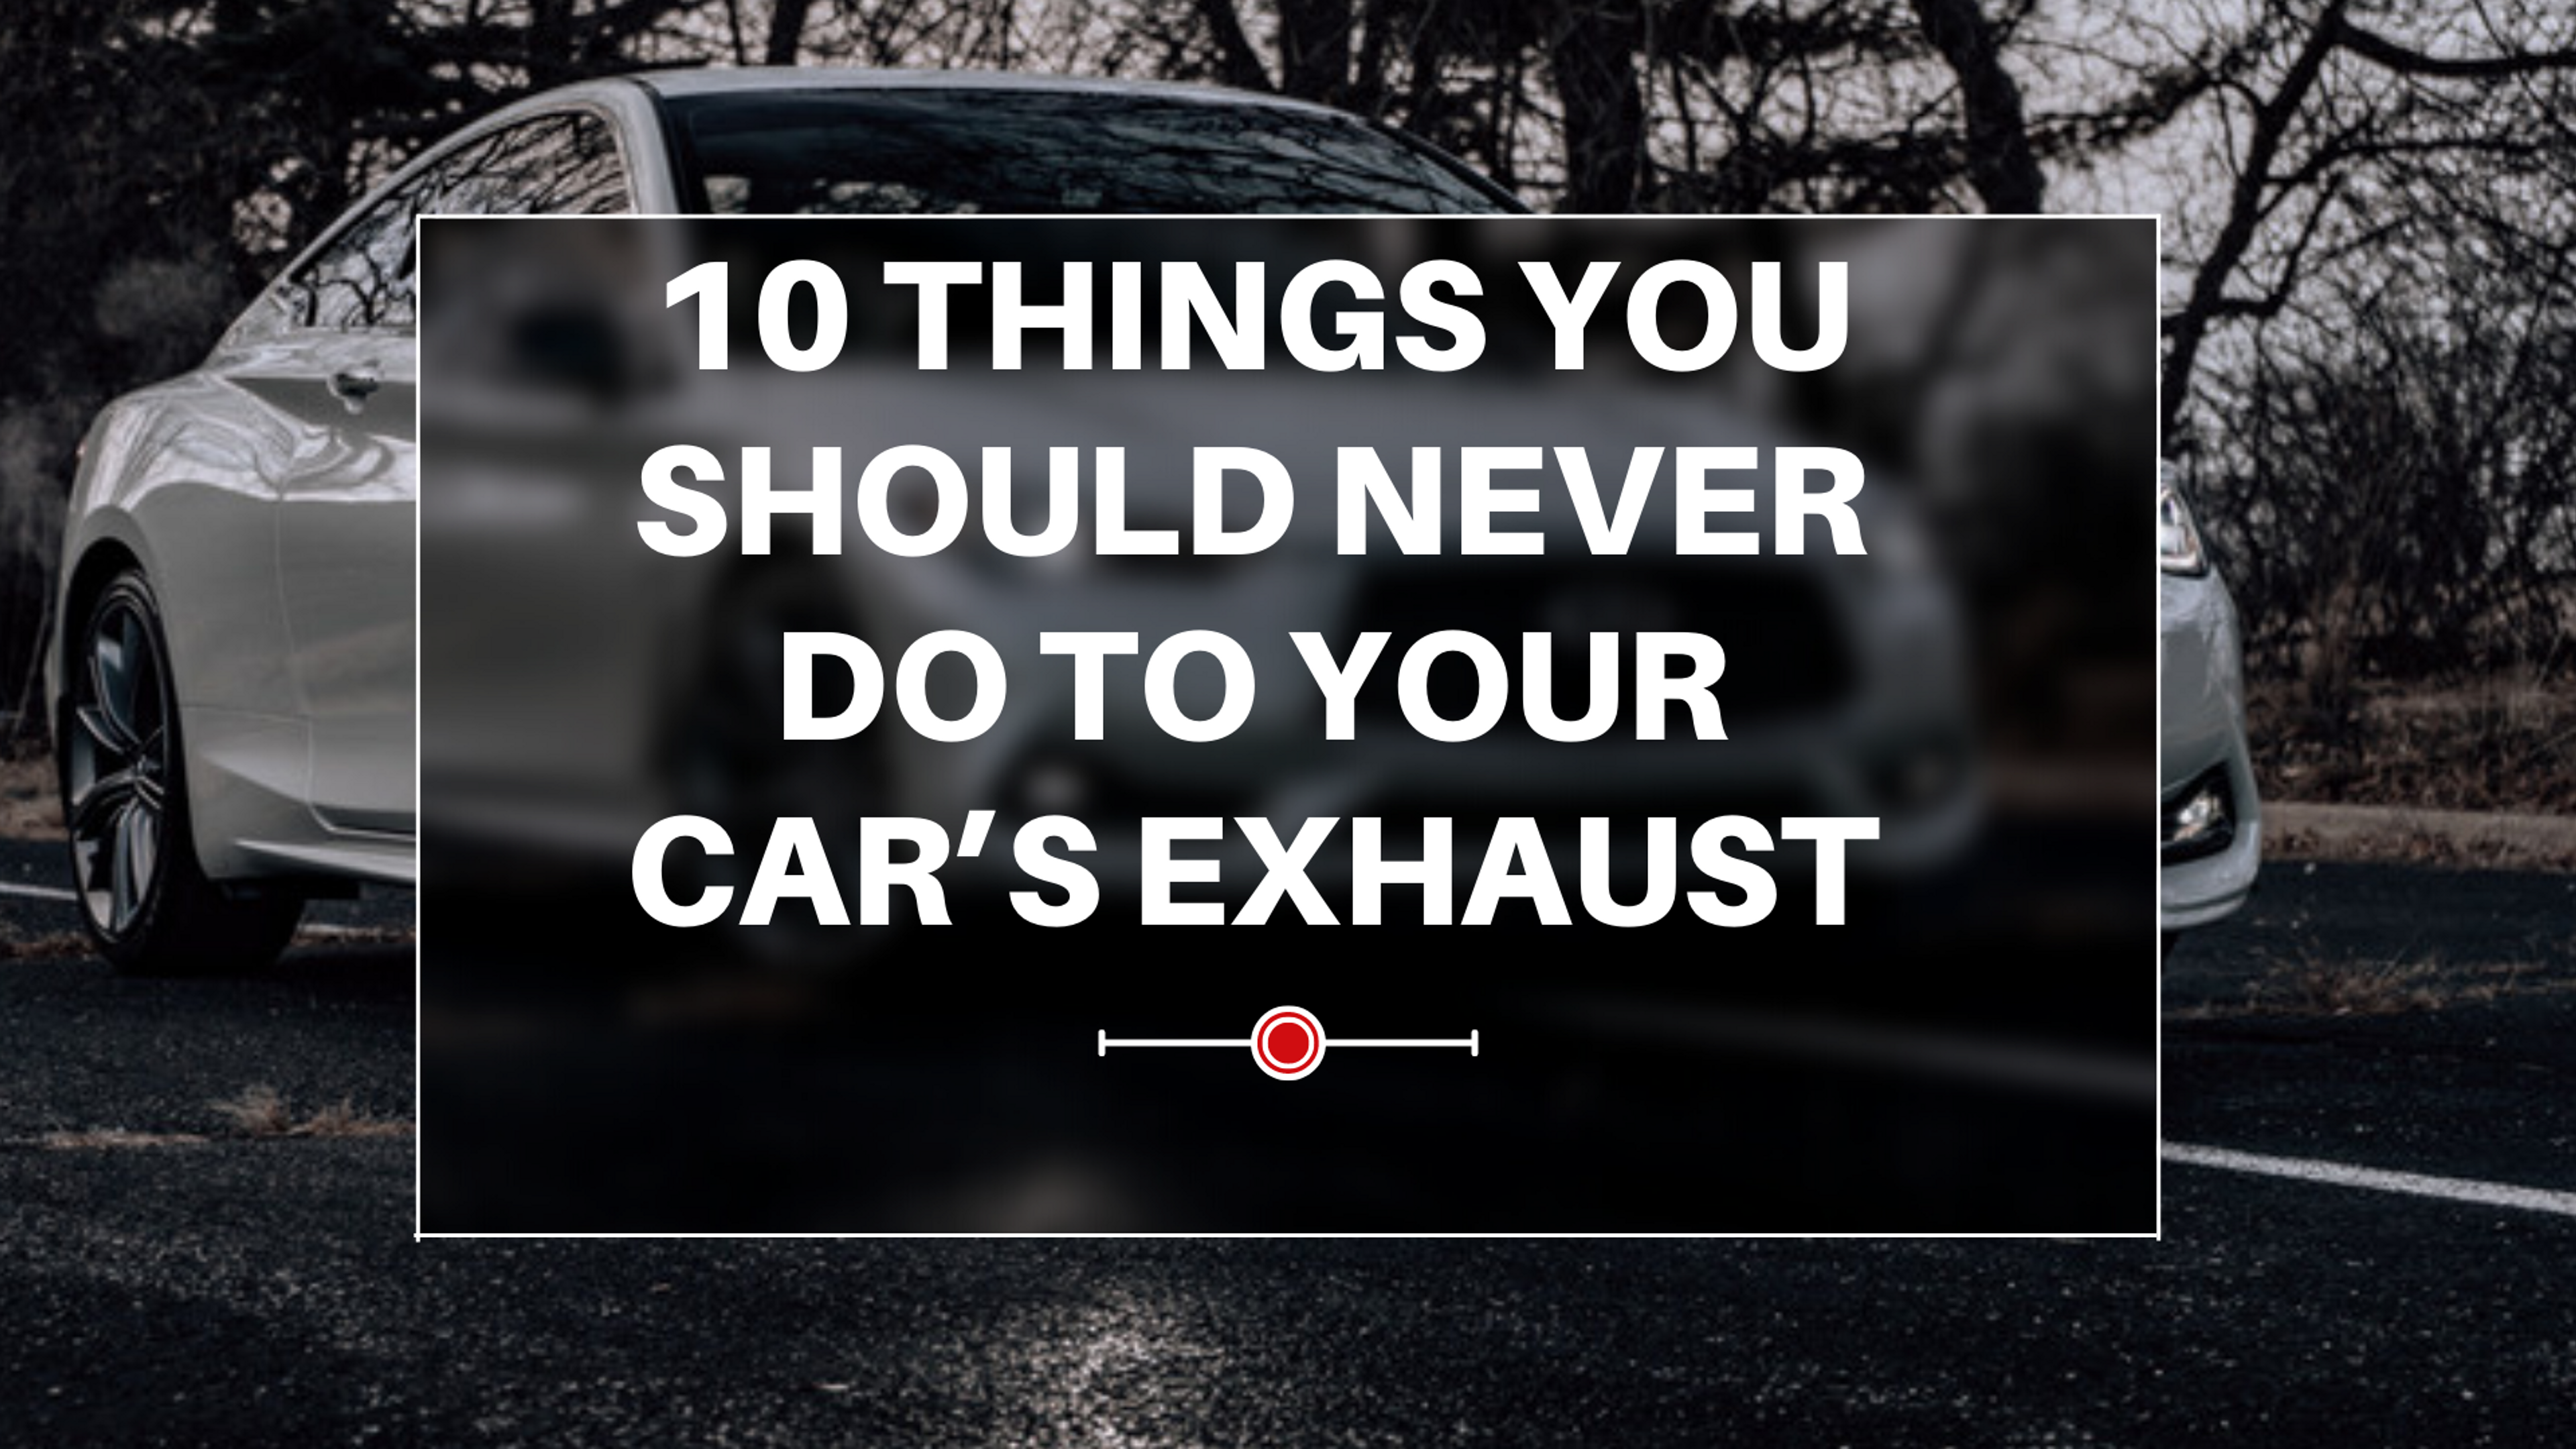 10 Things You Should Never Do to Your Car’s Exhaust